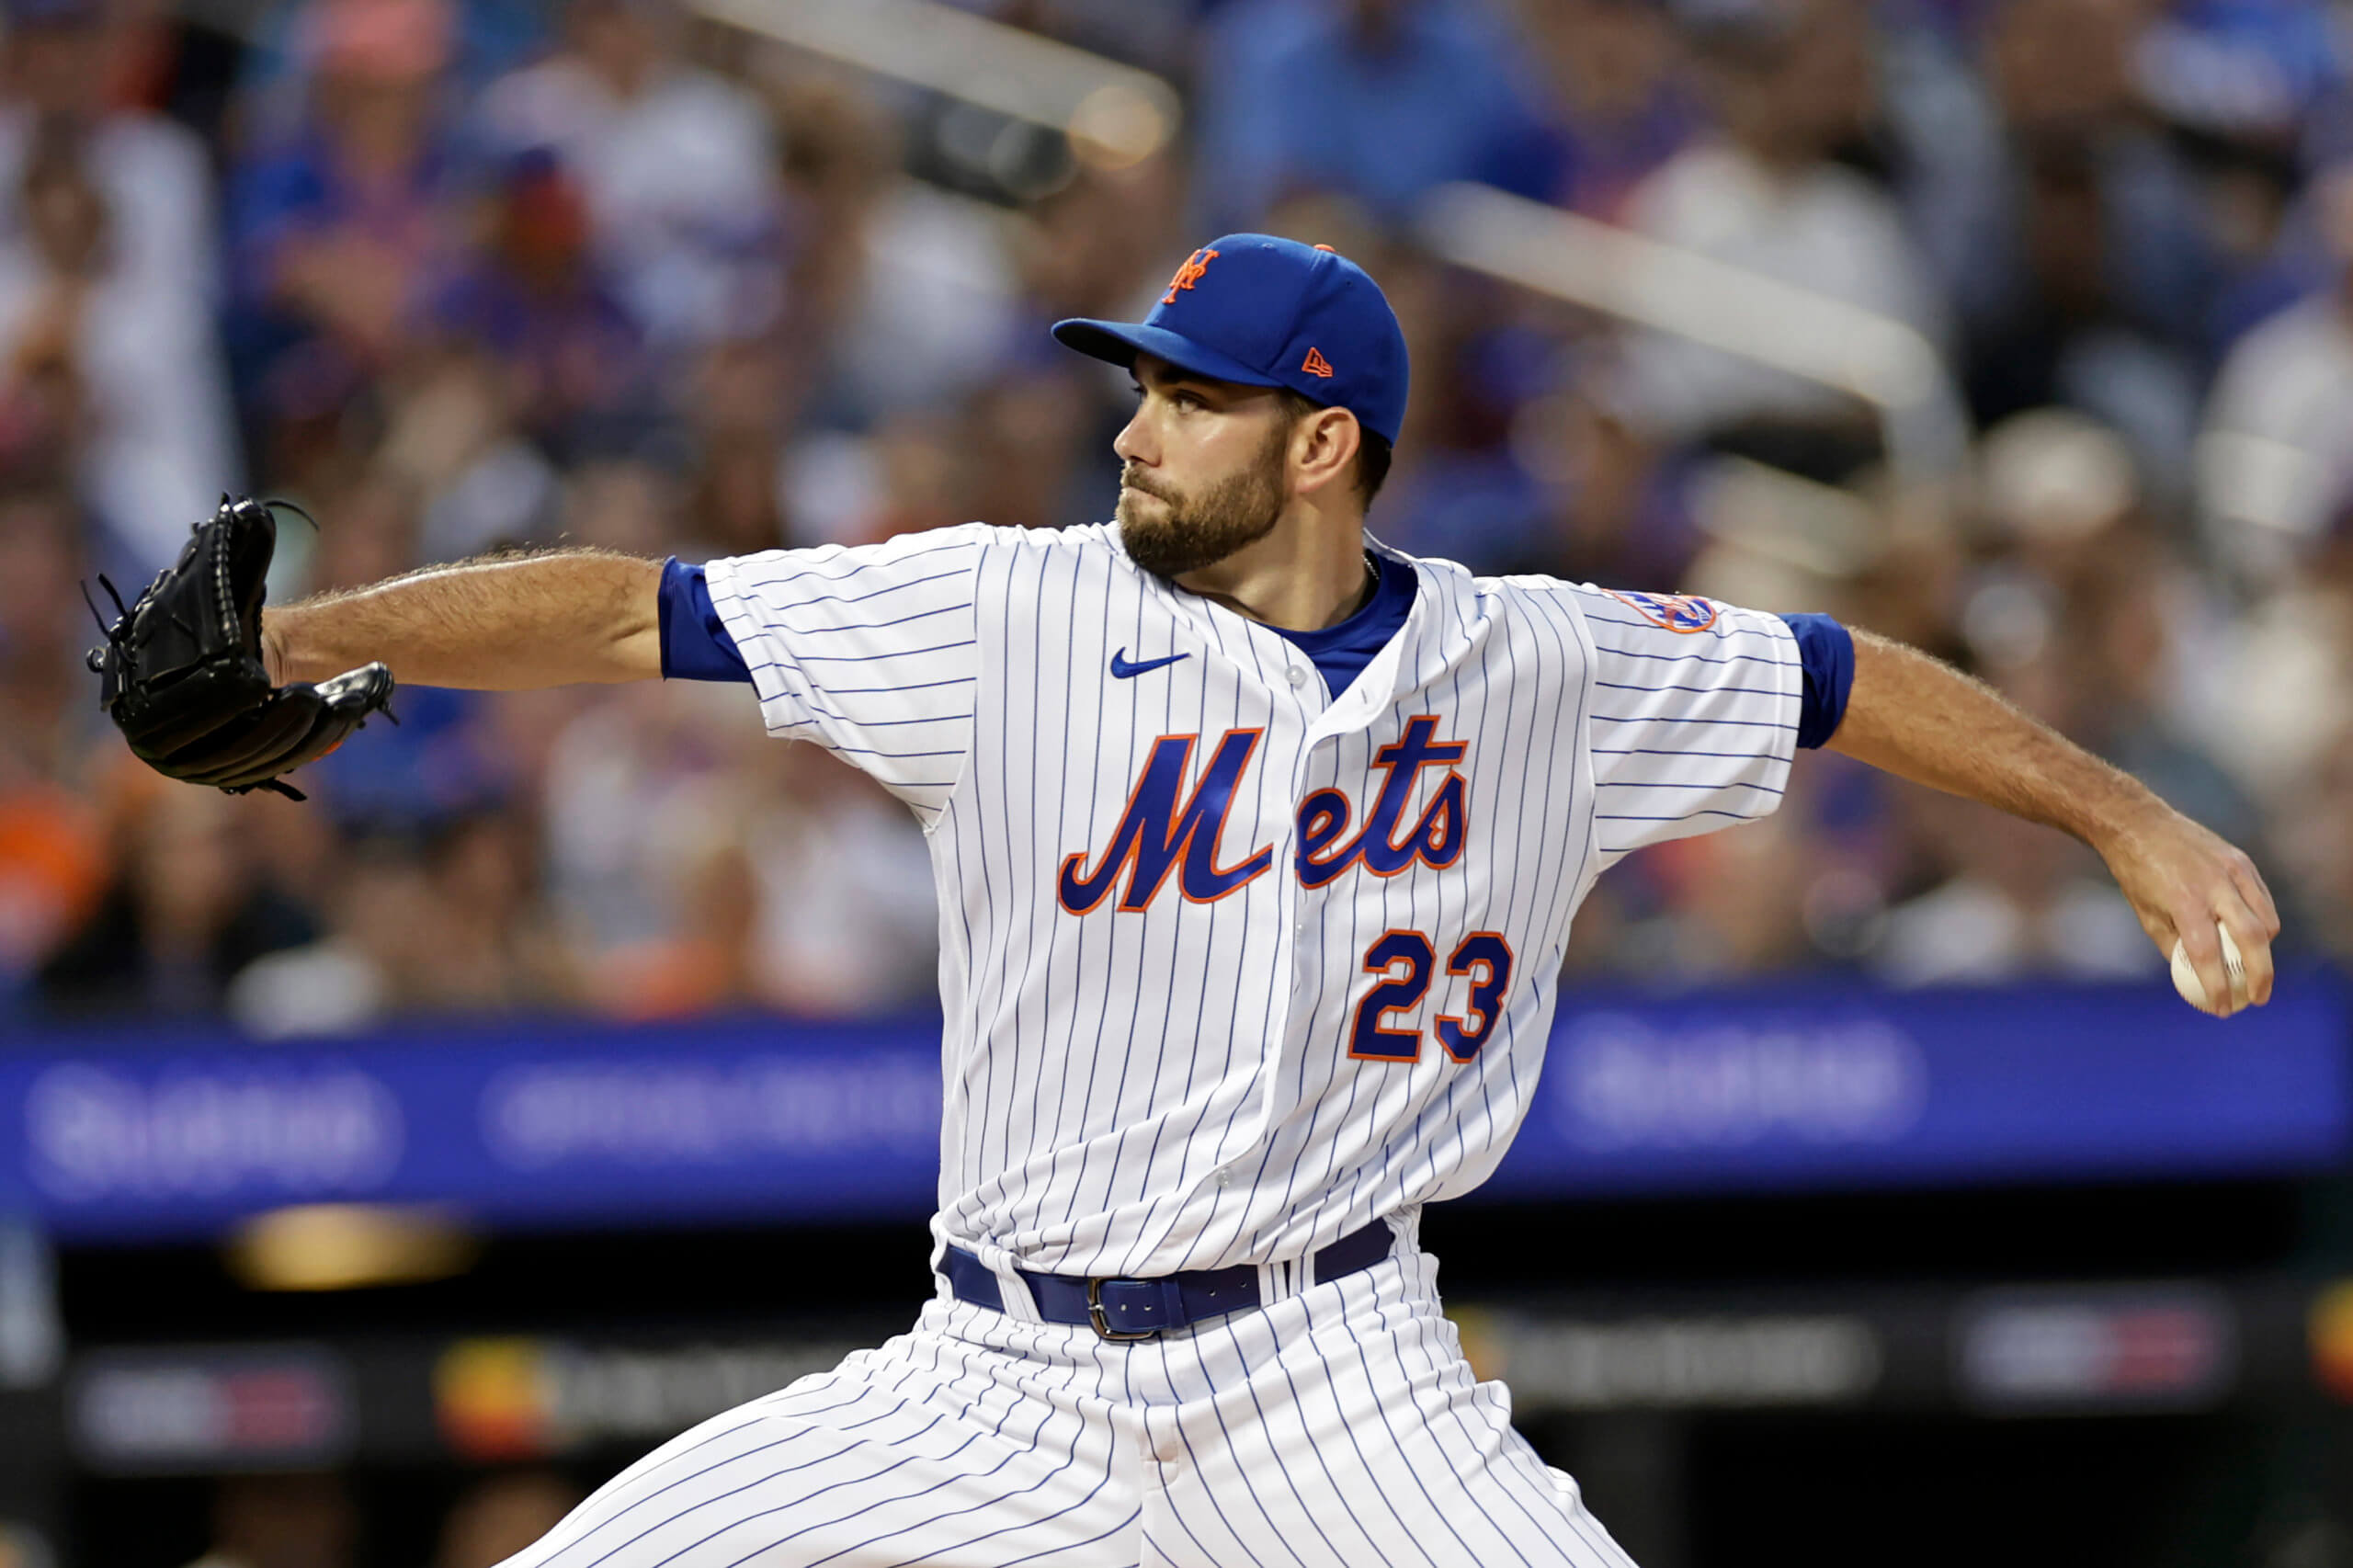 Mets' Max Scherzer to stay in minors for next appearance - Newsday